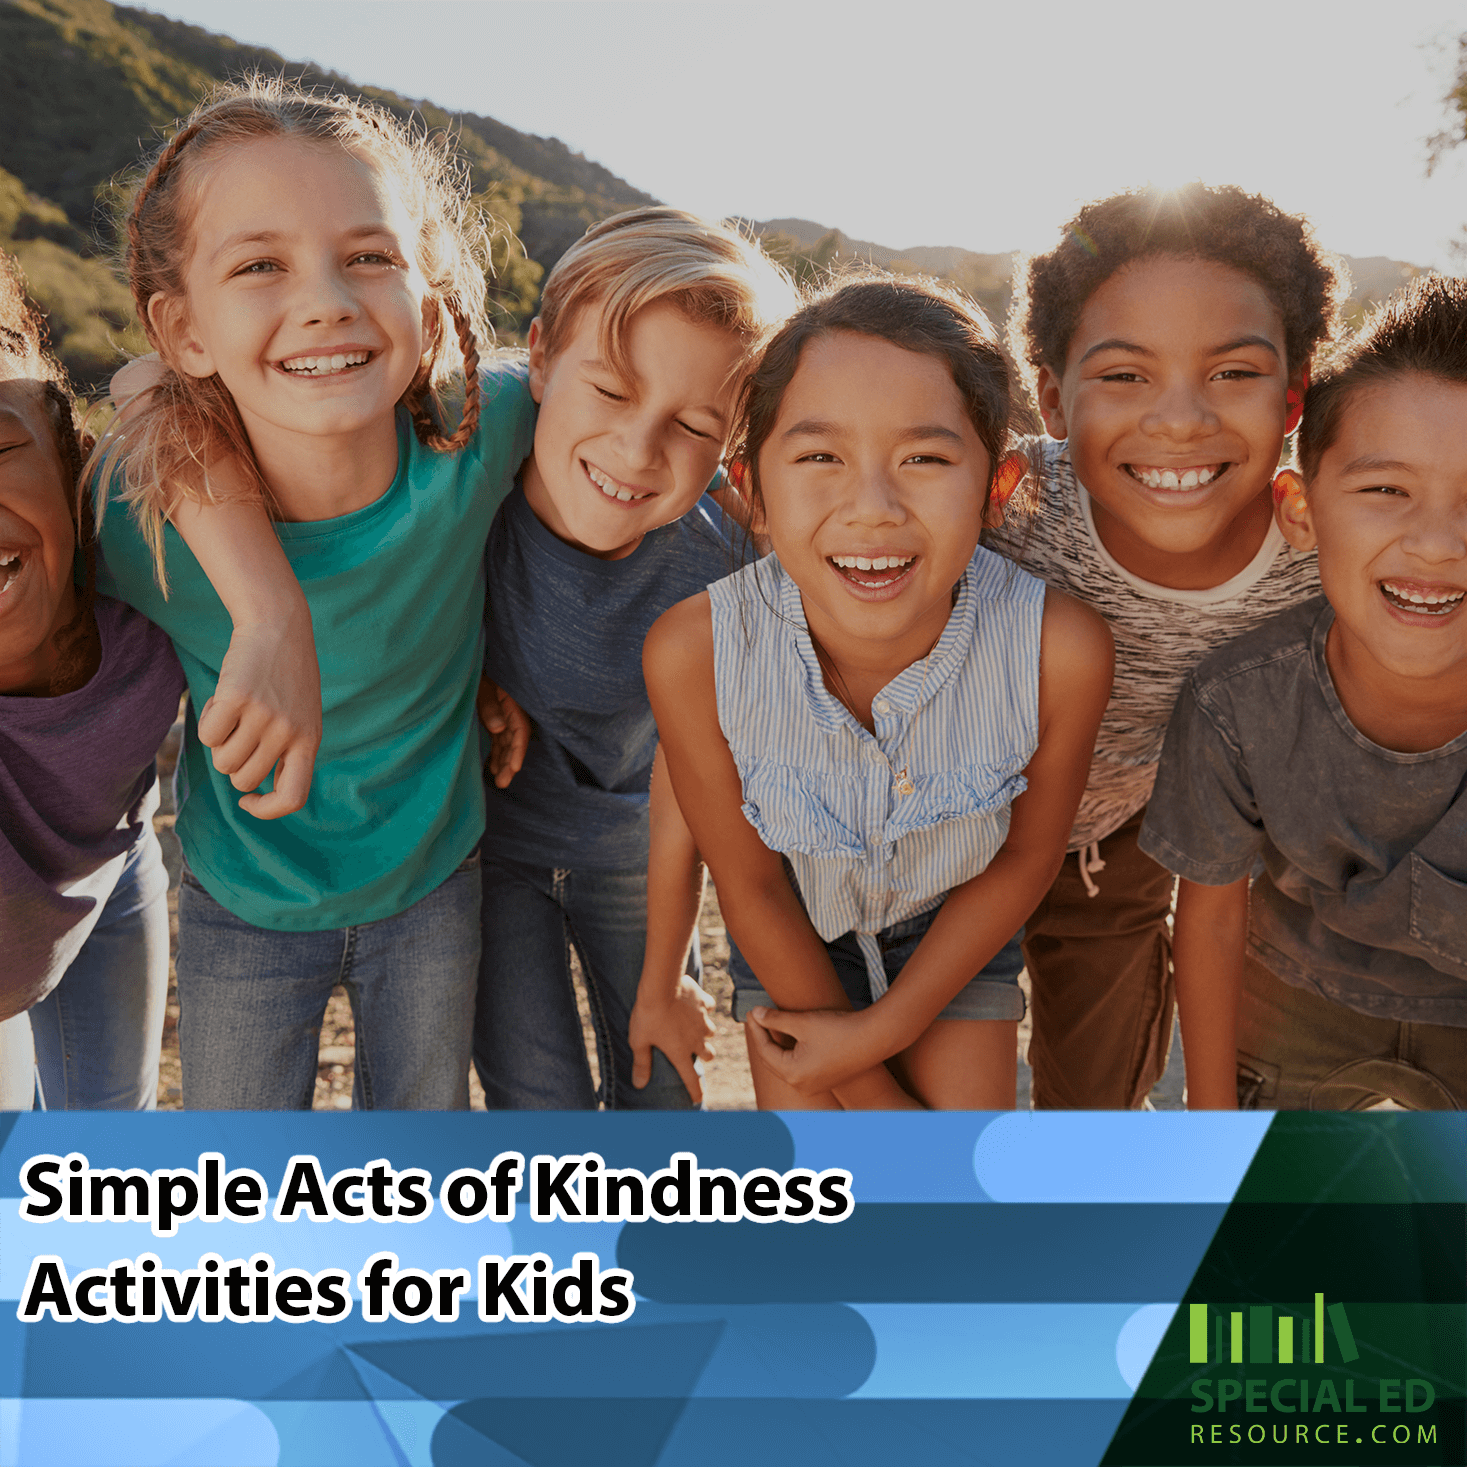 Group of diverse kids smiling together after they engaged in kindness activities for kids.